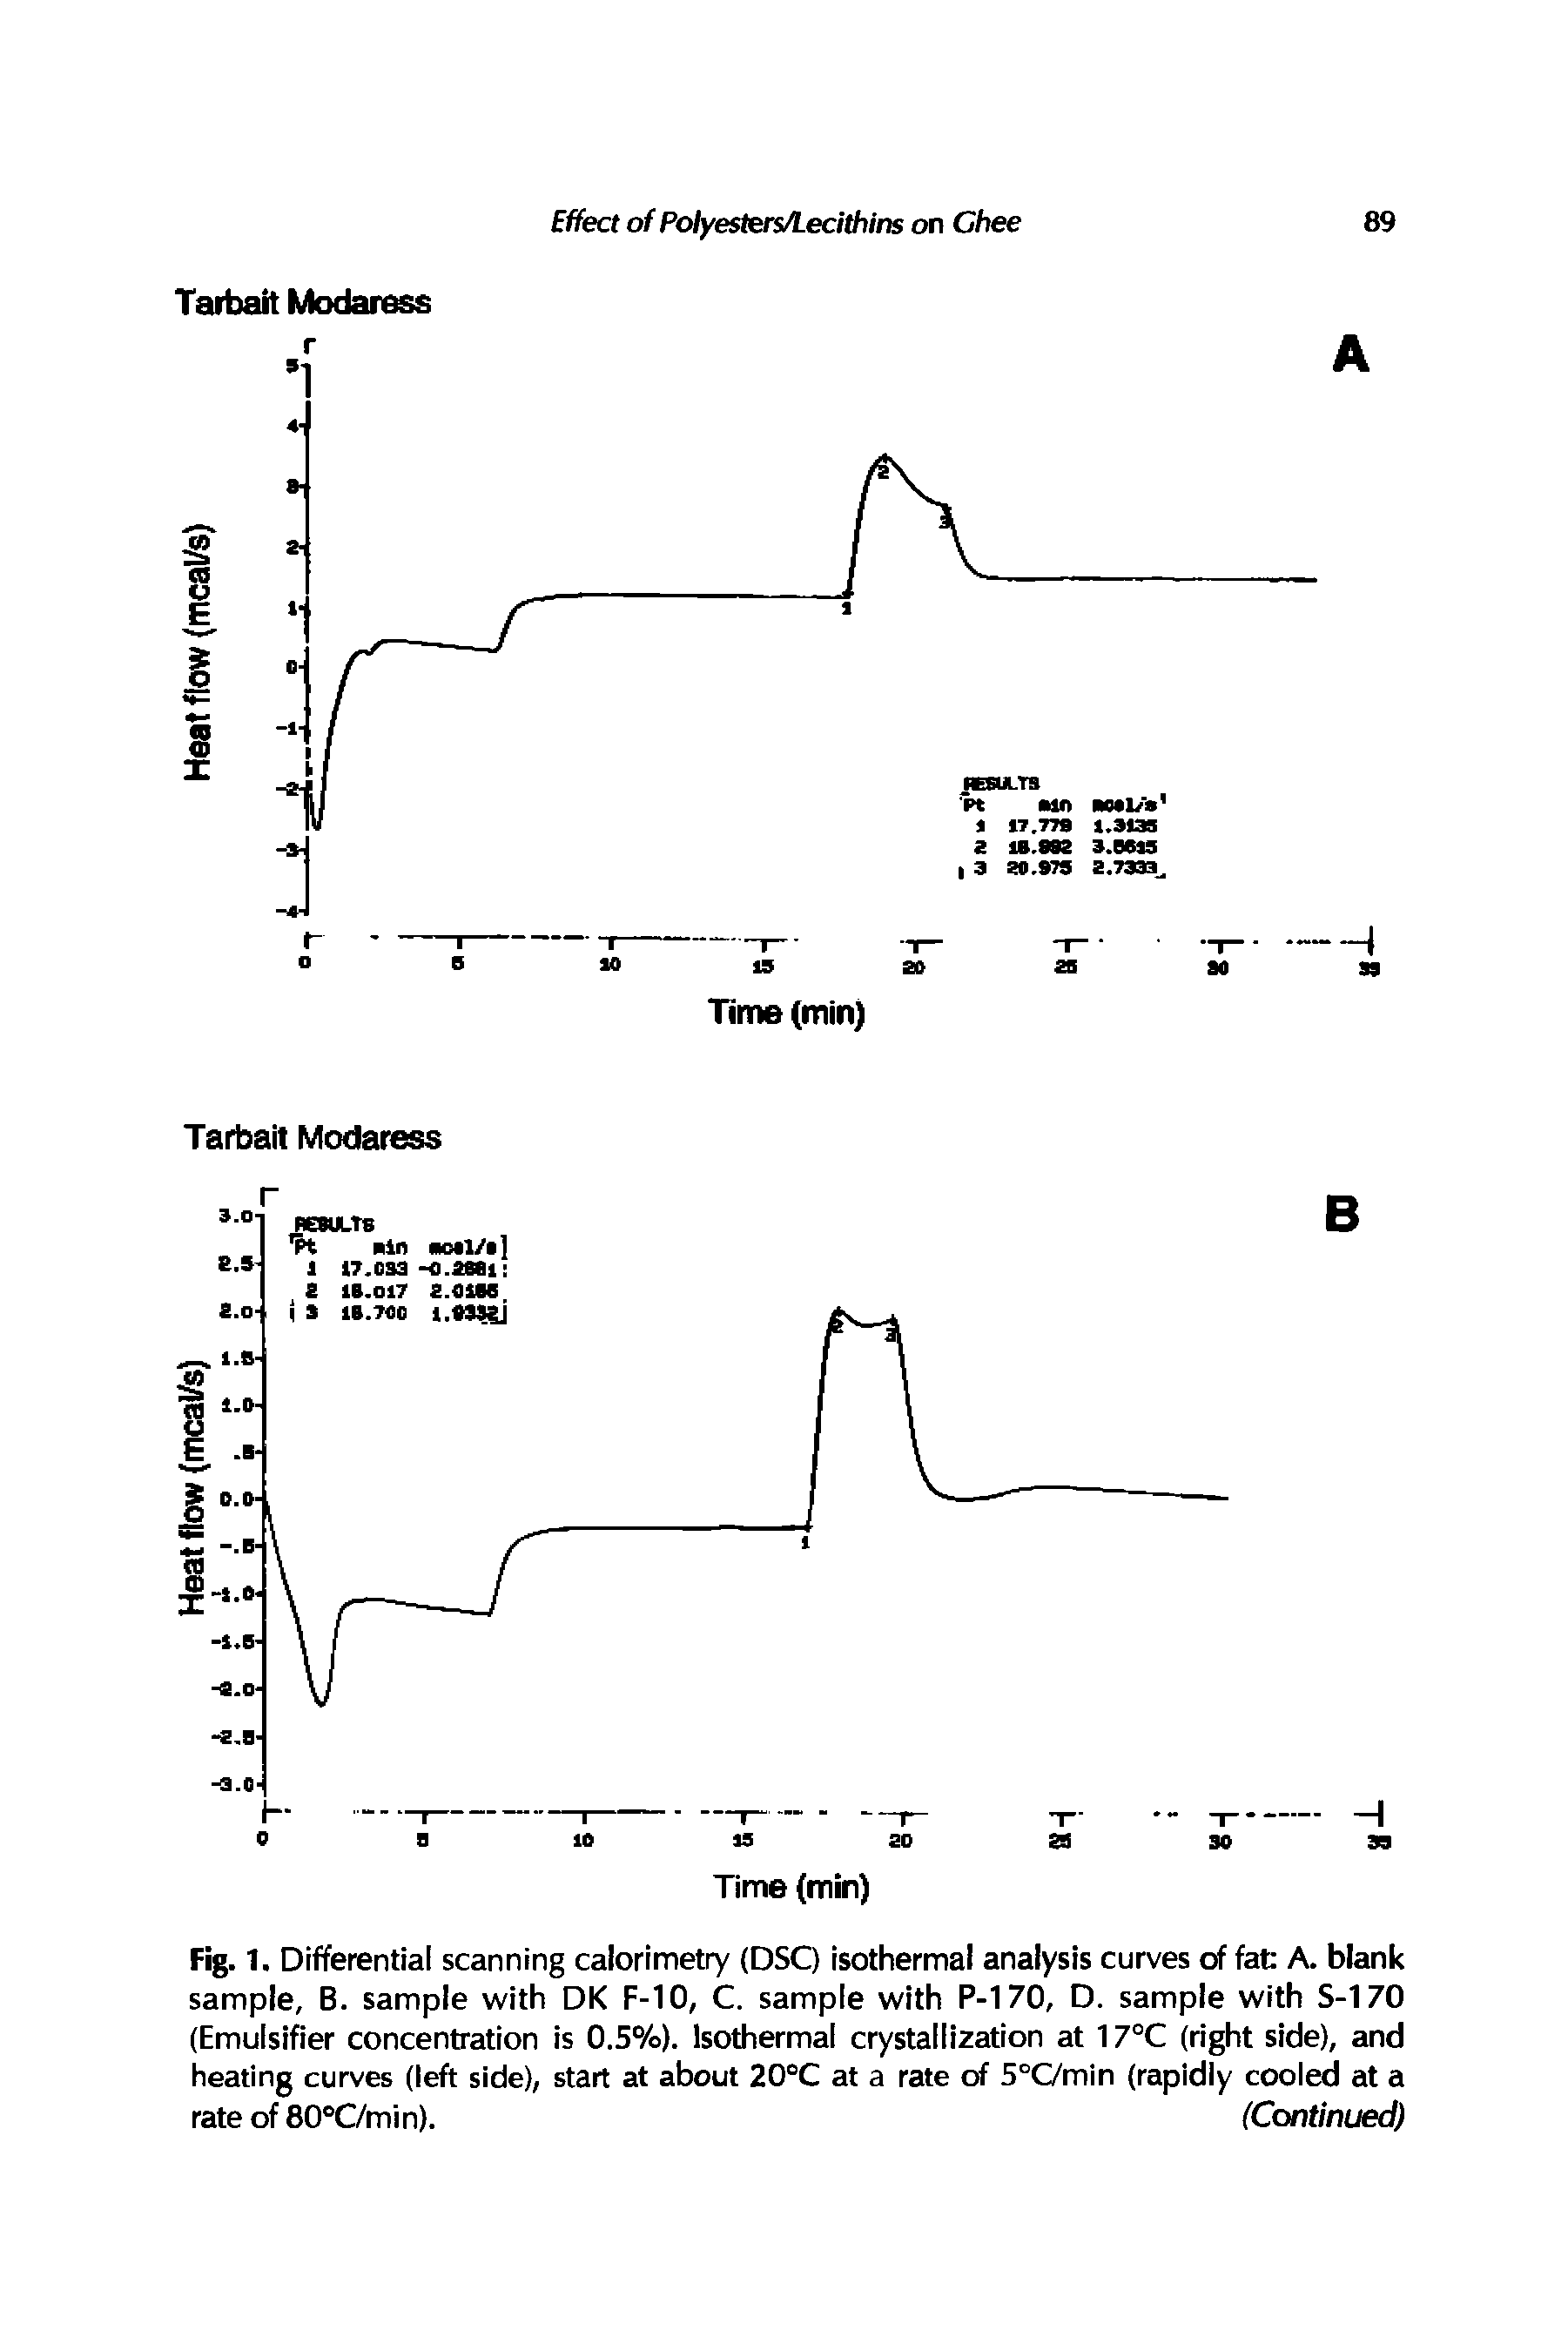 Fig. 1. Differential scanning calorimetry (DSC) isothermal analysis curves of fat A. blank sample, B. sample with DK F-10, C. sample with P-170, D. sample with S-170 (Emulsifier concentration is 0.5%). Isothermal crystallization at 17°C (right side), and heating curves (left side), start at about 20°C at a rate of 5°C/min (rapidly cooled at a rateof 80°C/min). (Continued)...